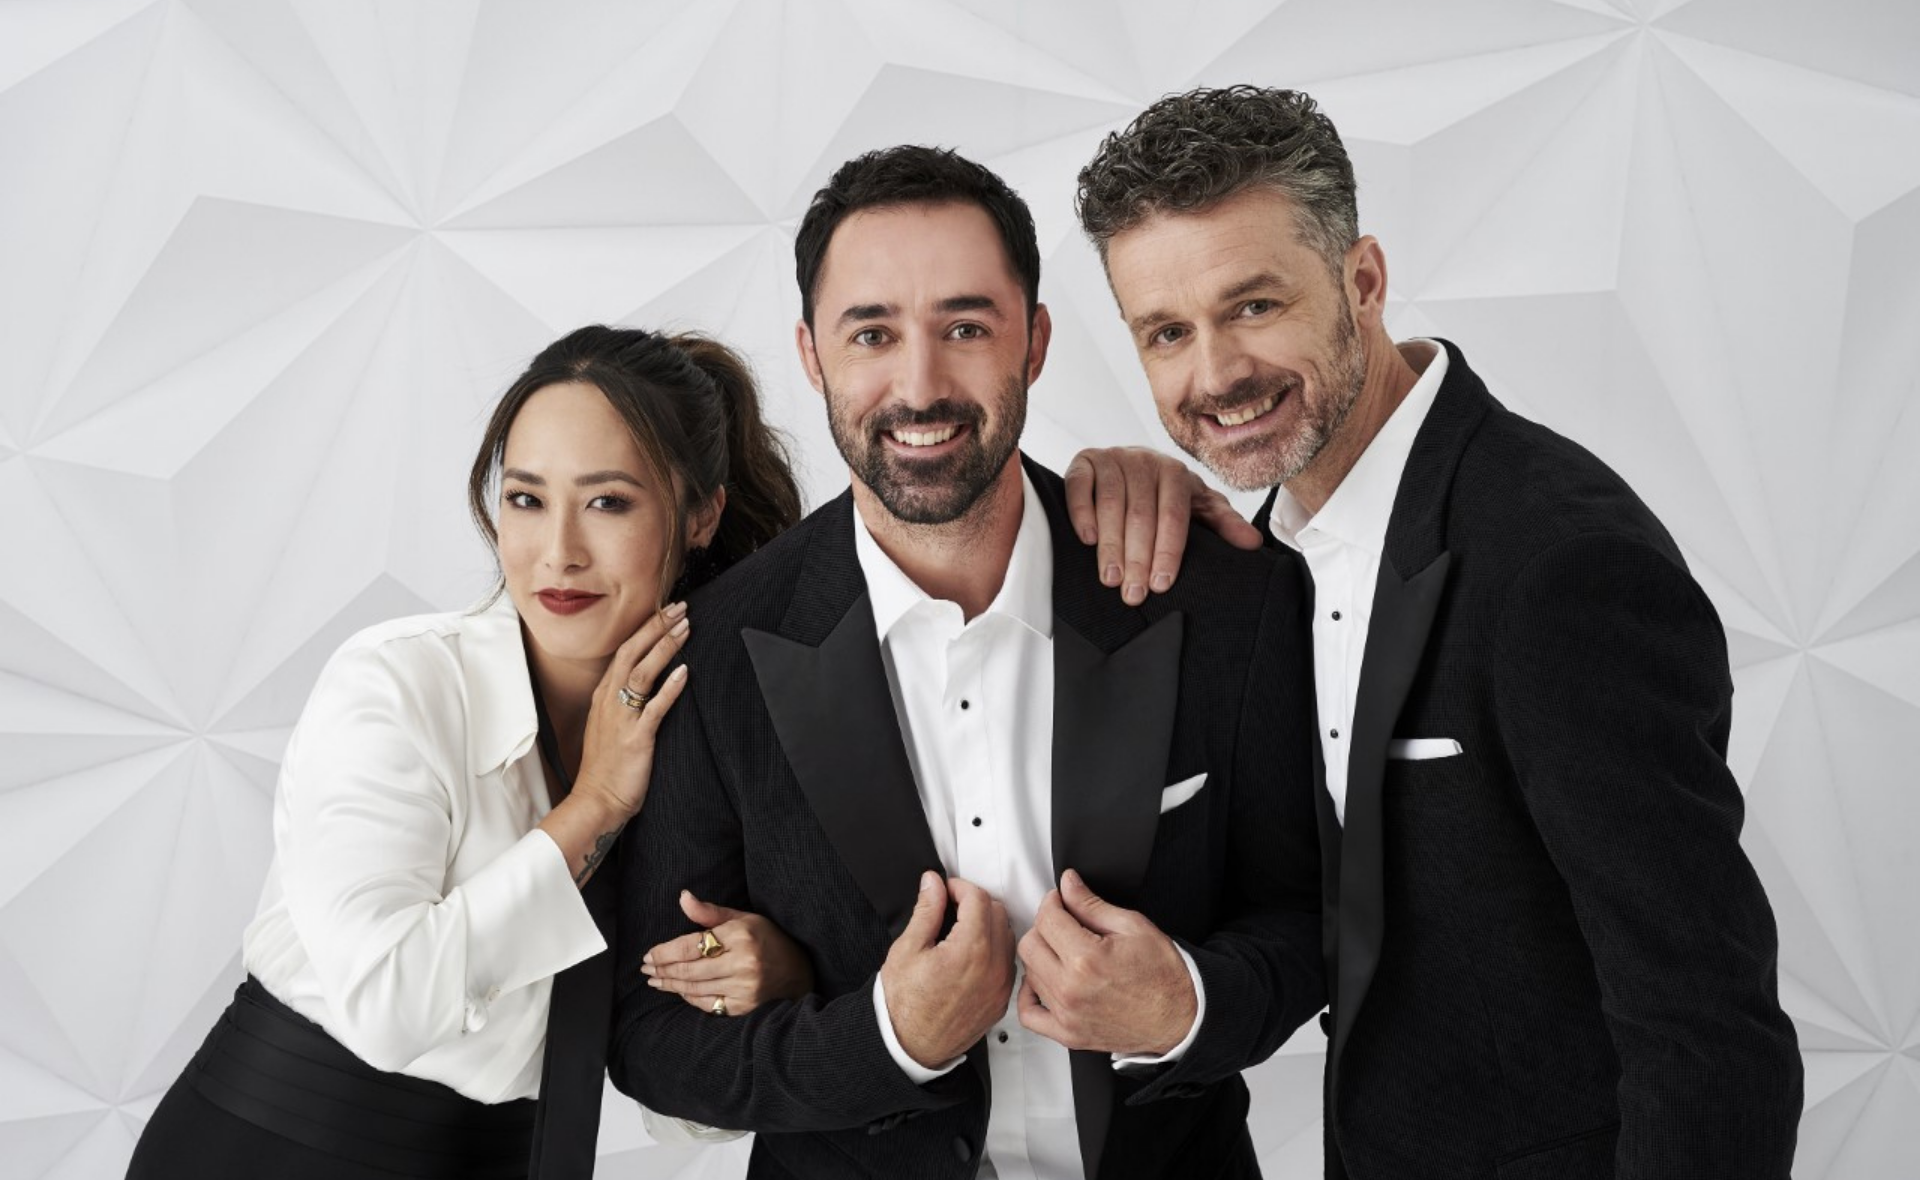 MasterChef Australia’s Andy, Melissa and Jock reveal how they went from strangers to close friends